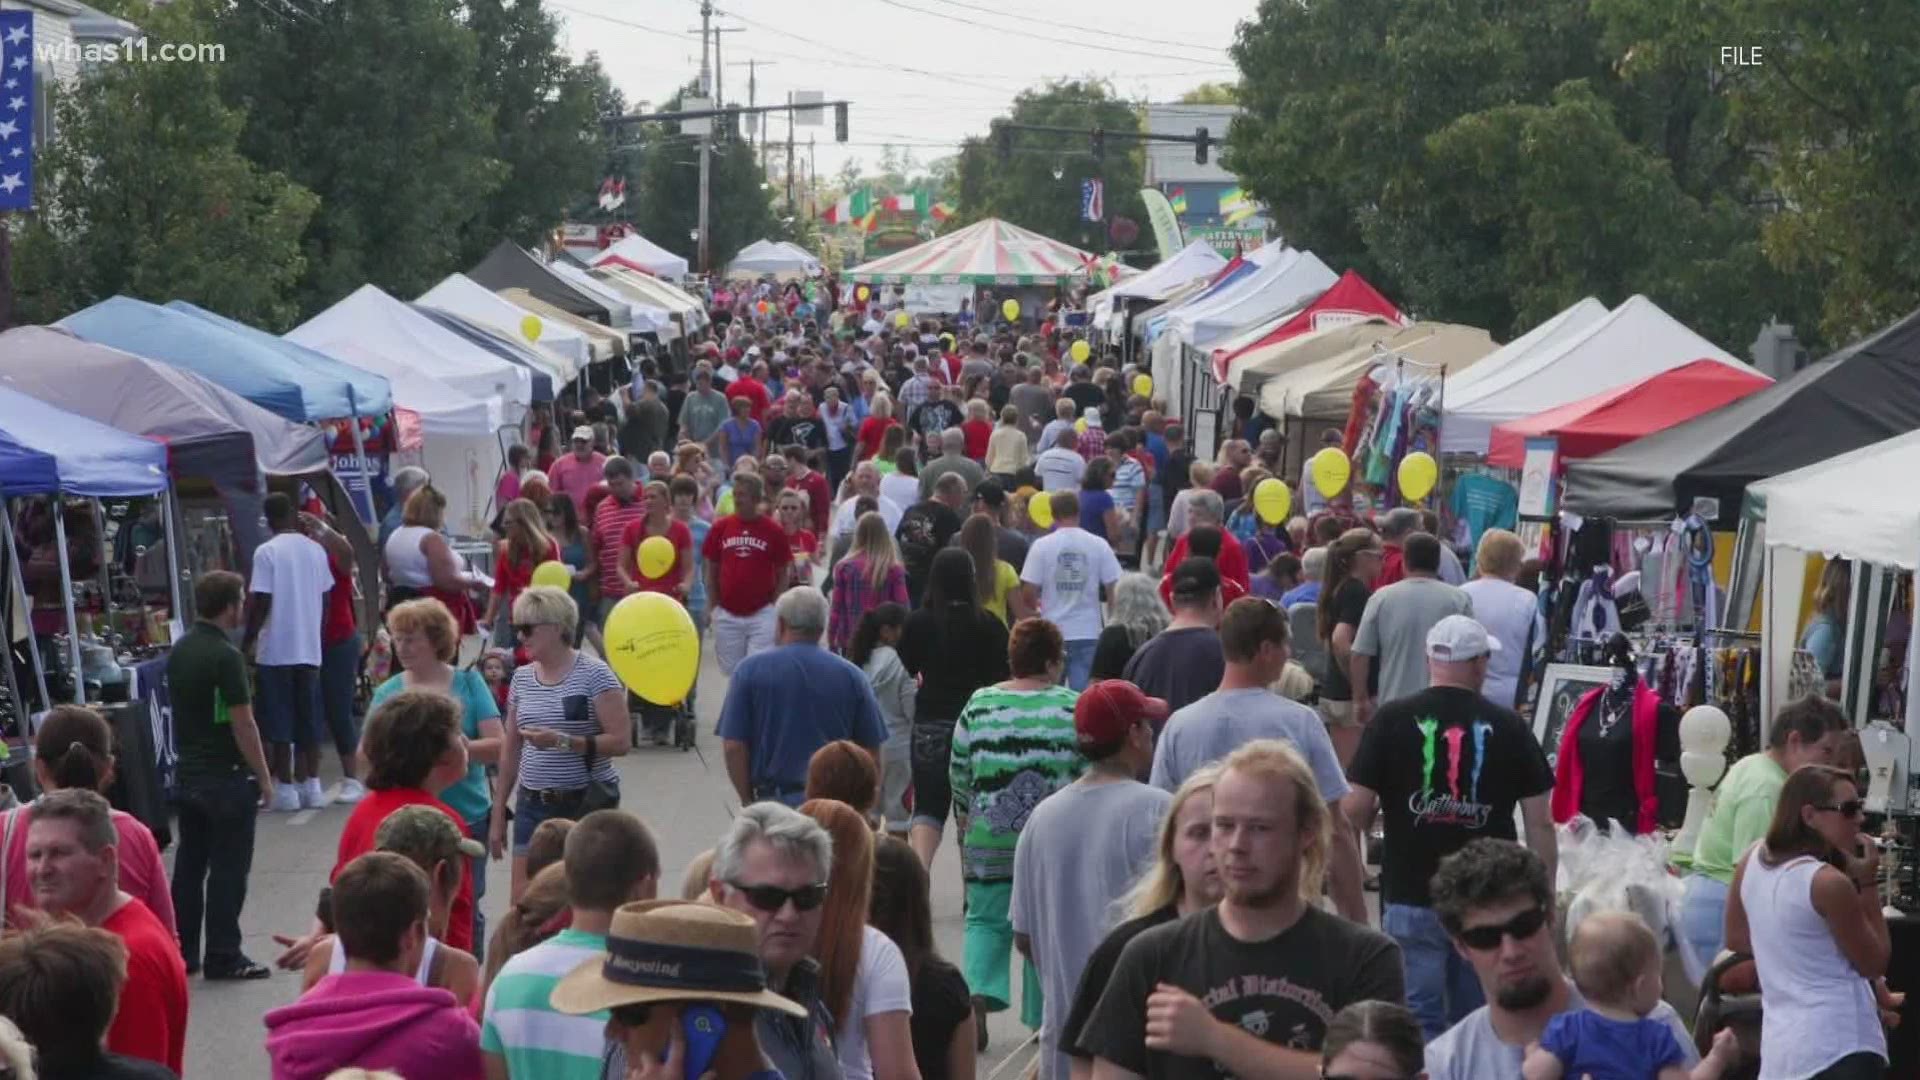 The Gaslight Festival has always been the unofficial kickoff to fall for the community and will have a different feel this year due to COVD-19.